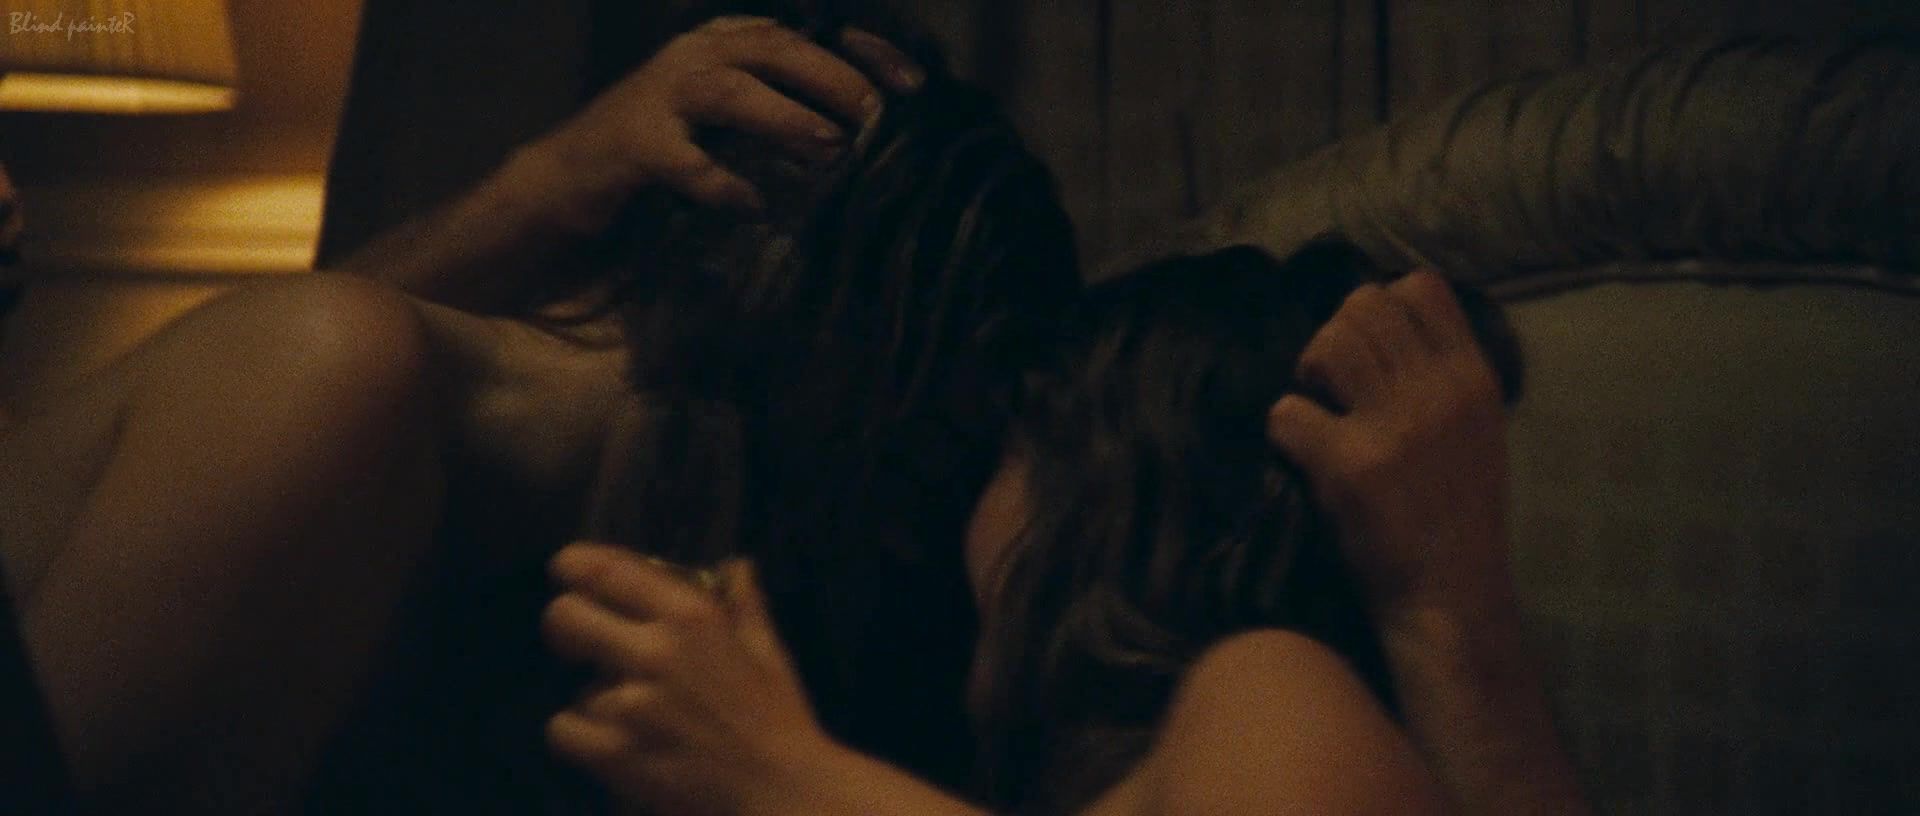 Collar Sex video Camille Rowe - Our Day Will Come (Notre Jour Viendra) (2010) Thuylinh